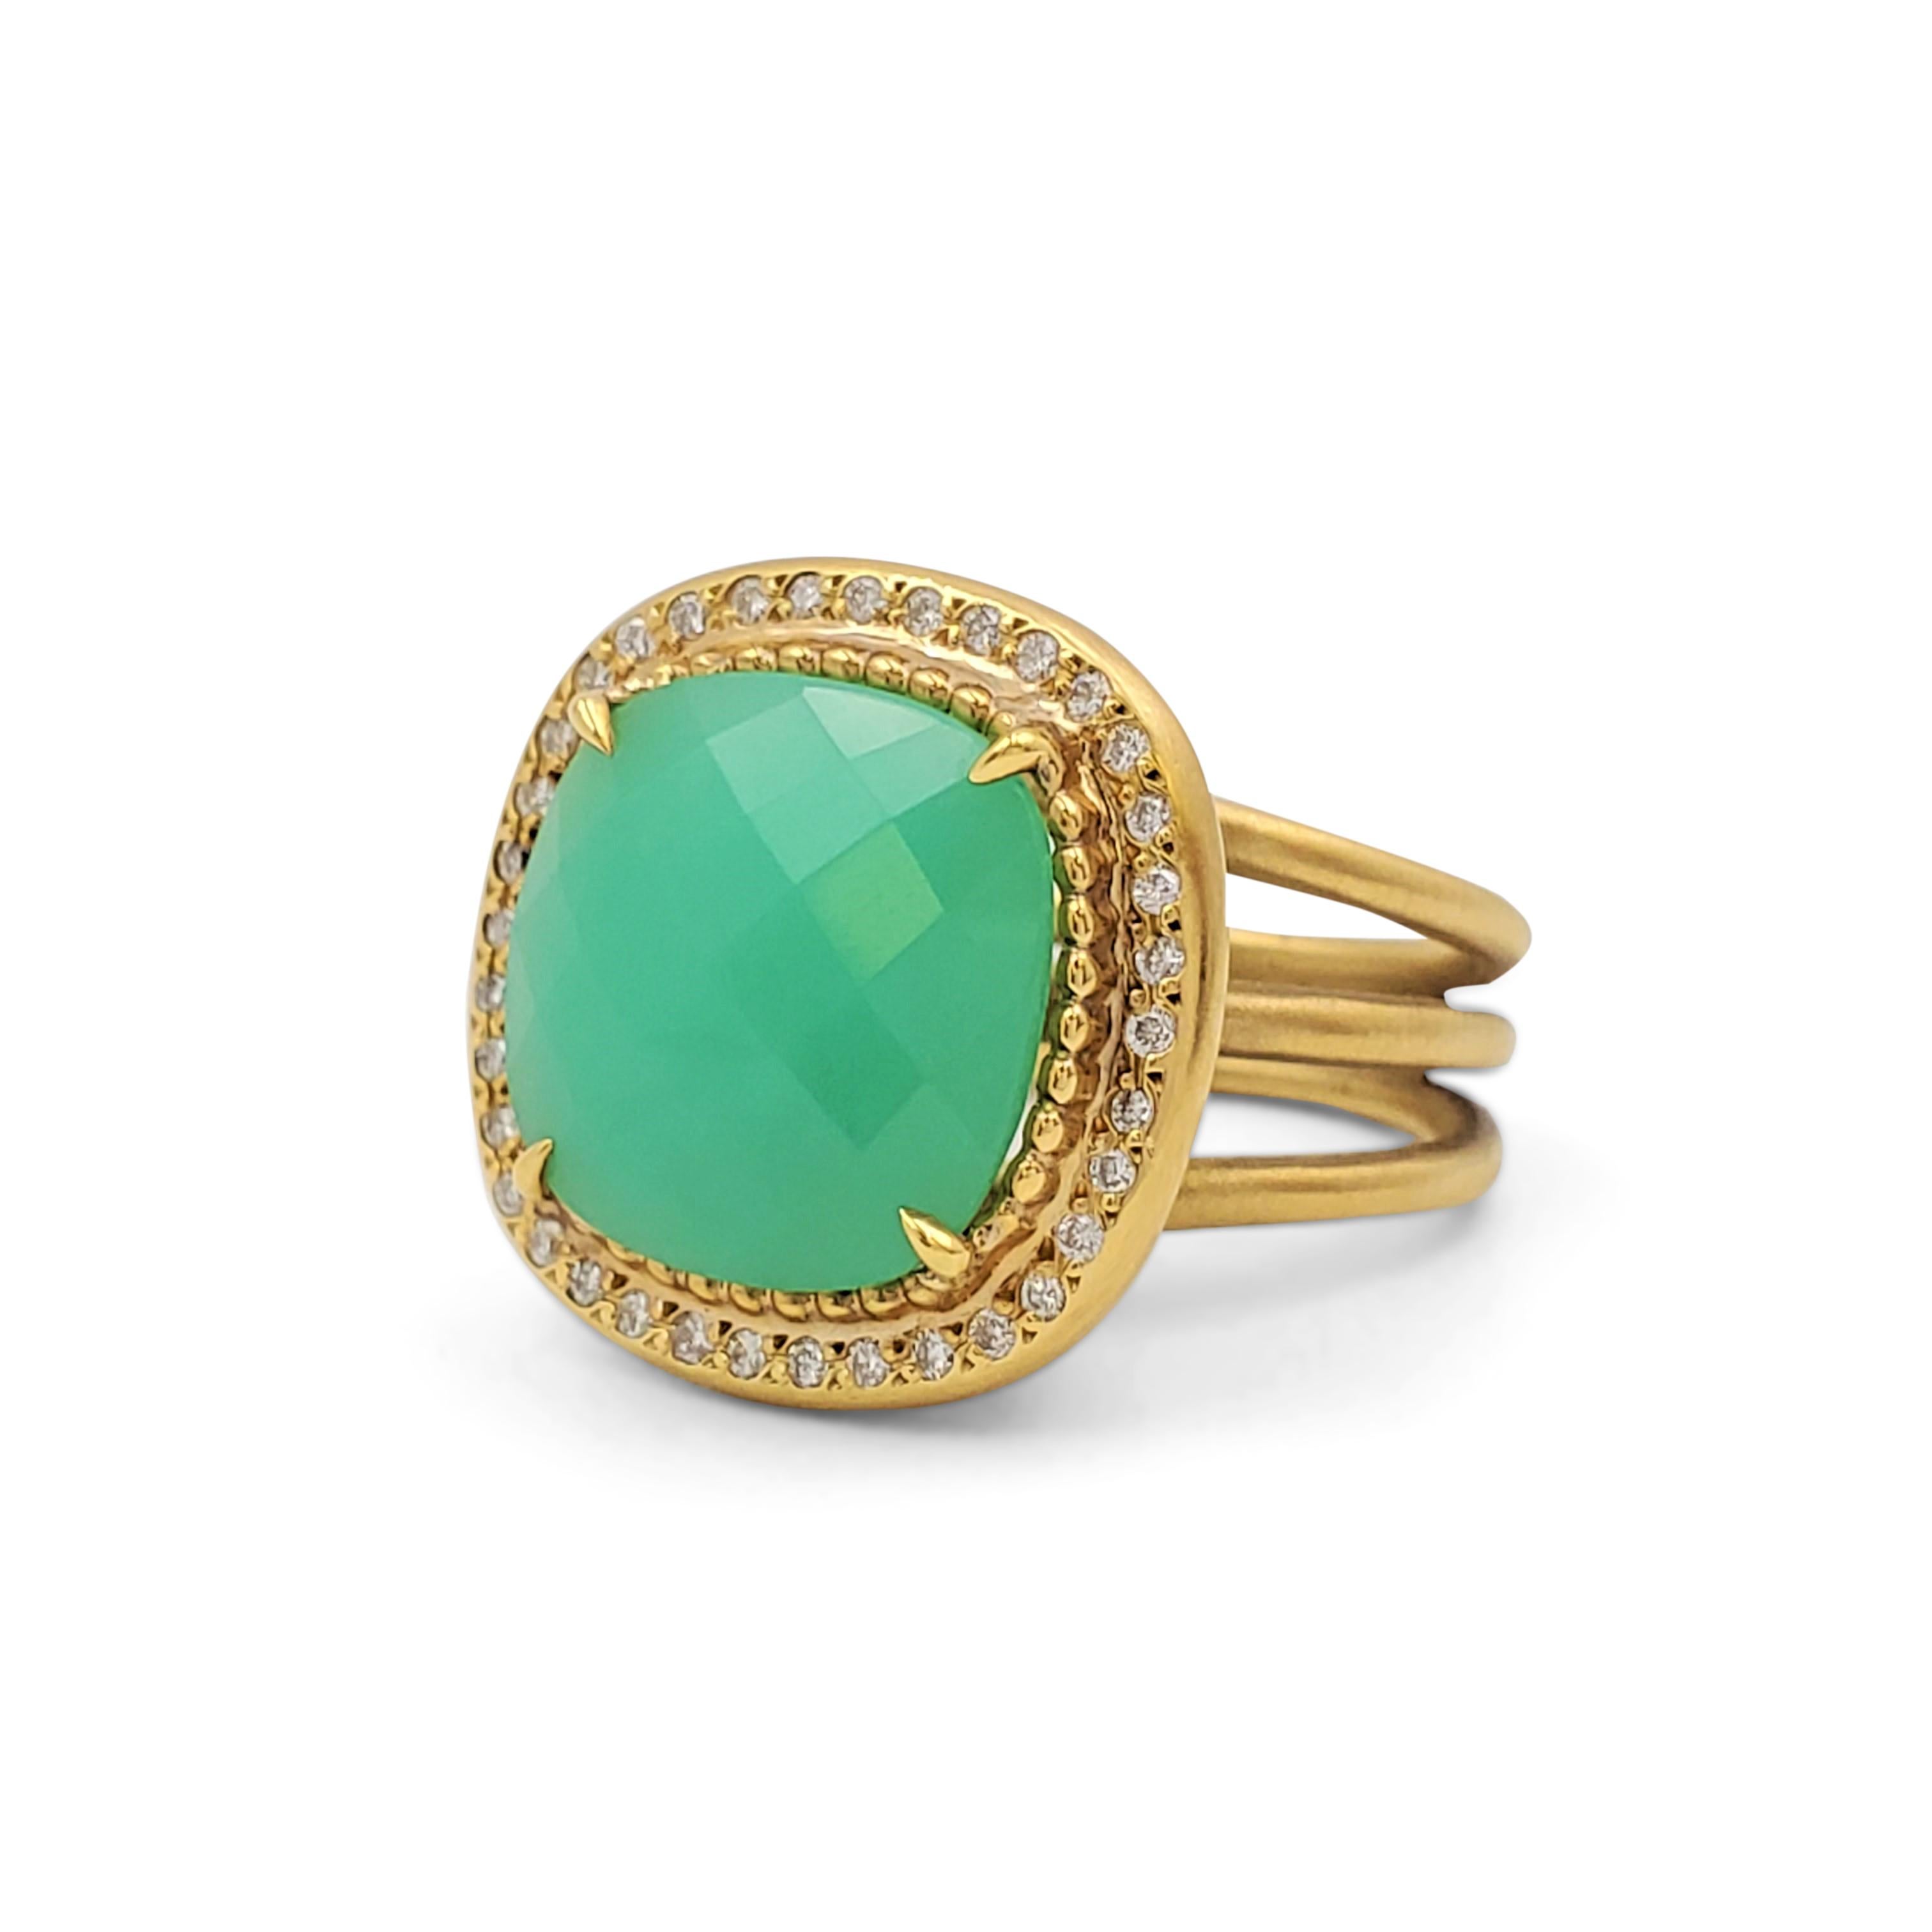 Authentic Lauren K. ring crafted in 18 karat satin-finished yellow gold. This ring is set with a bright 8-carat faceted cushion chrysoprase accented with a halo of gold beads and round brilliant cut diamonds totaling 0.25 carats. The ring measures